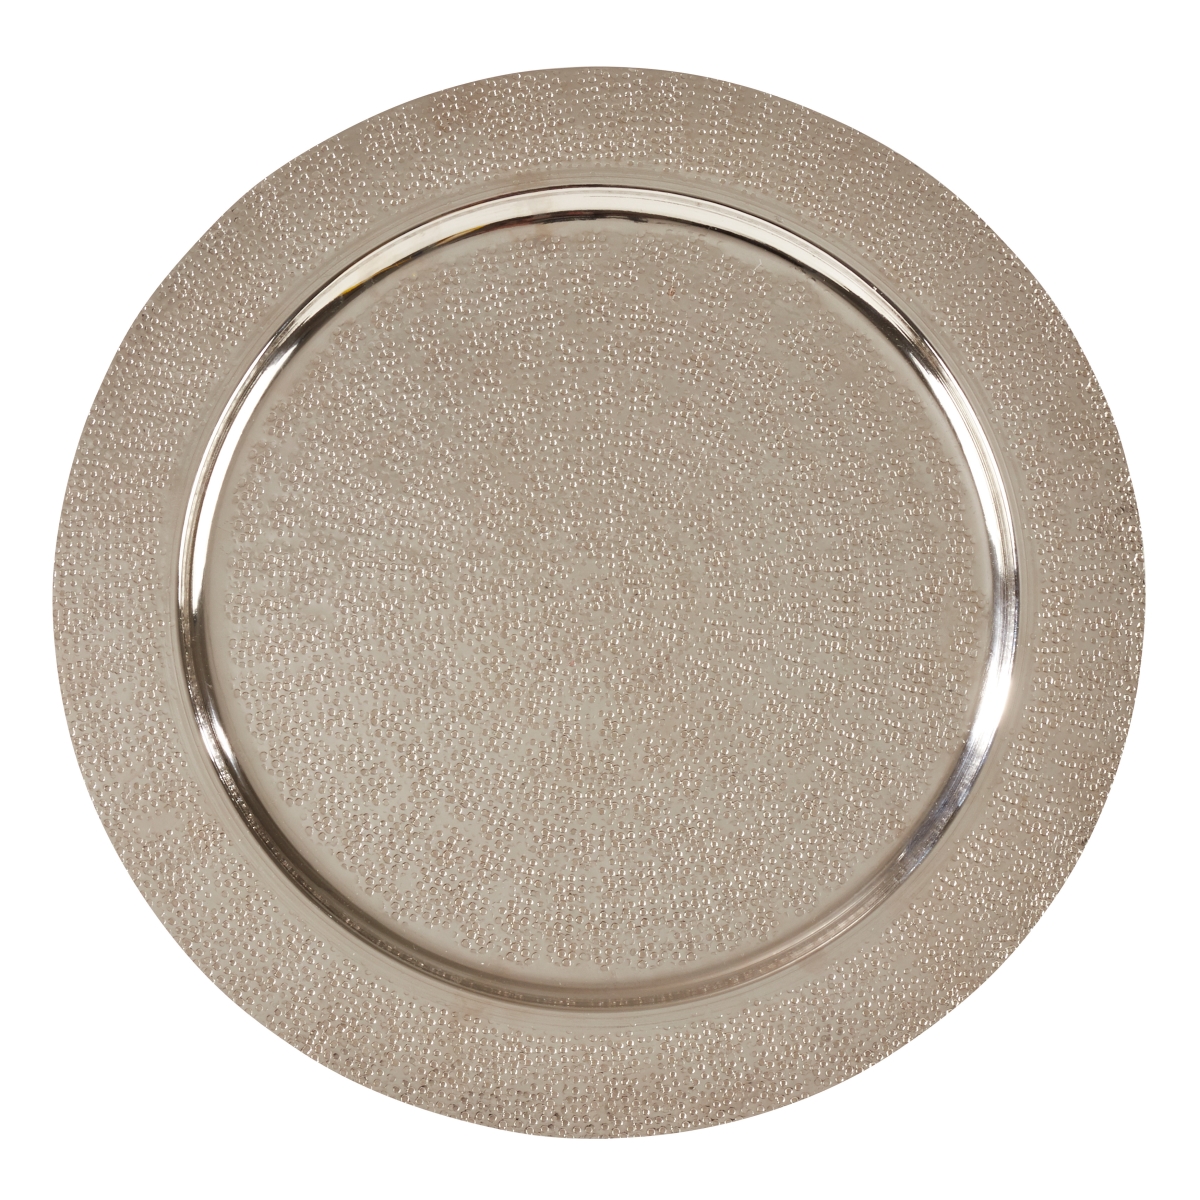 Ch945.s13r 13 In. Round Aluminum Charger Plates With Hammered Design - Silver, Set Of 4